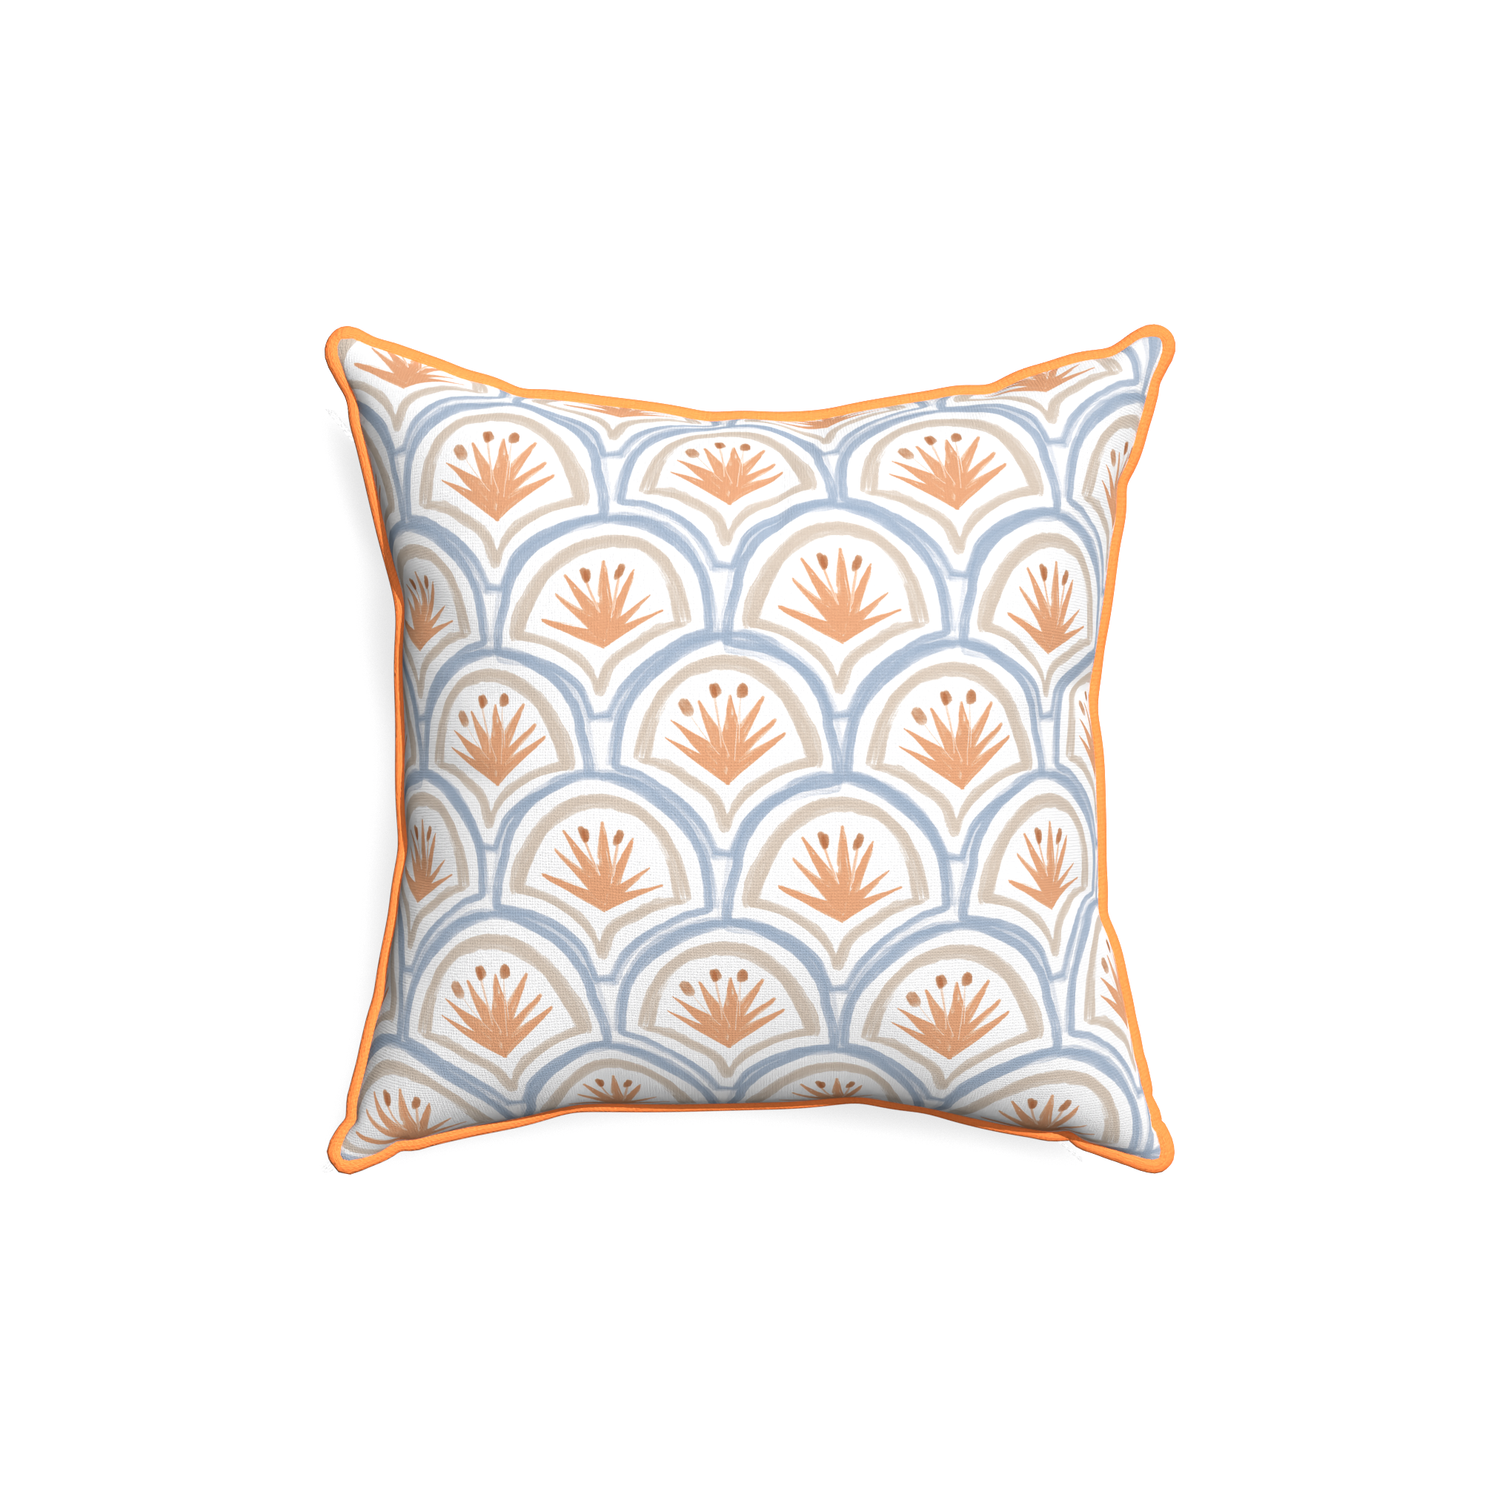 18-square thatcher apricot custom art deco palm patternpillow with clementine piping on white background